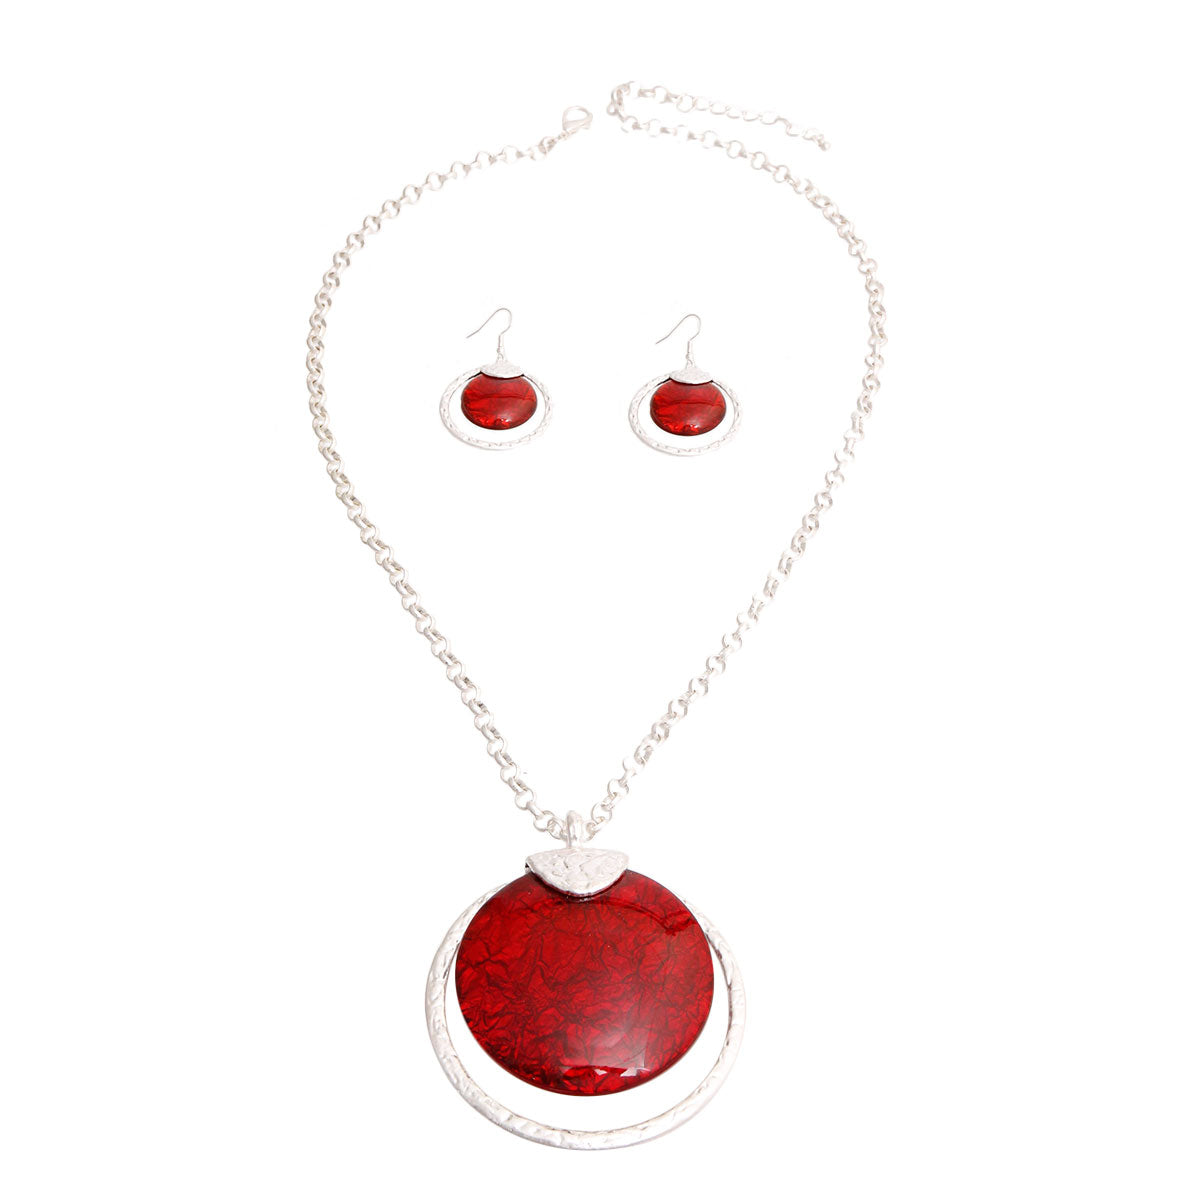 Matte Silver and Round Red Pendant Set